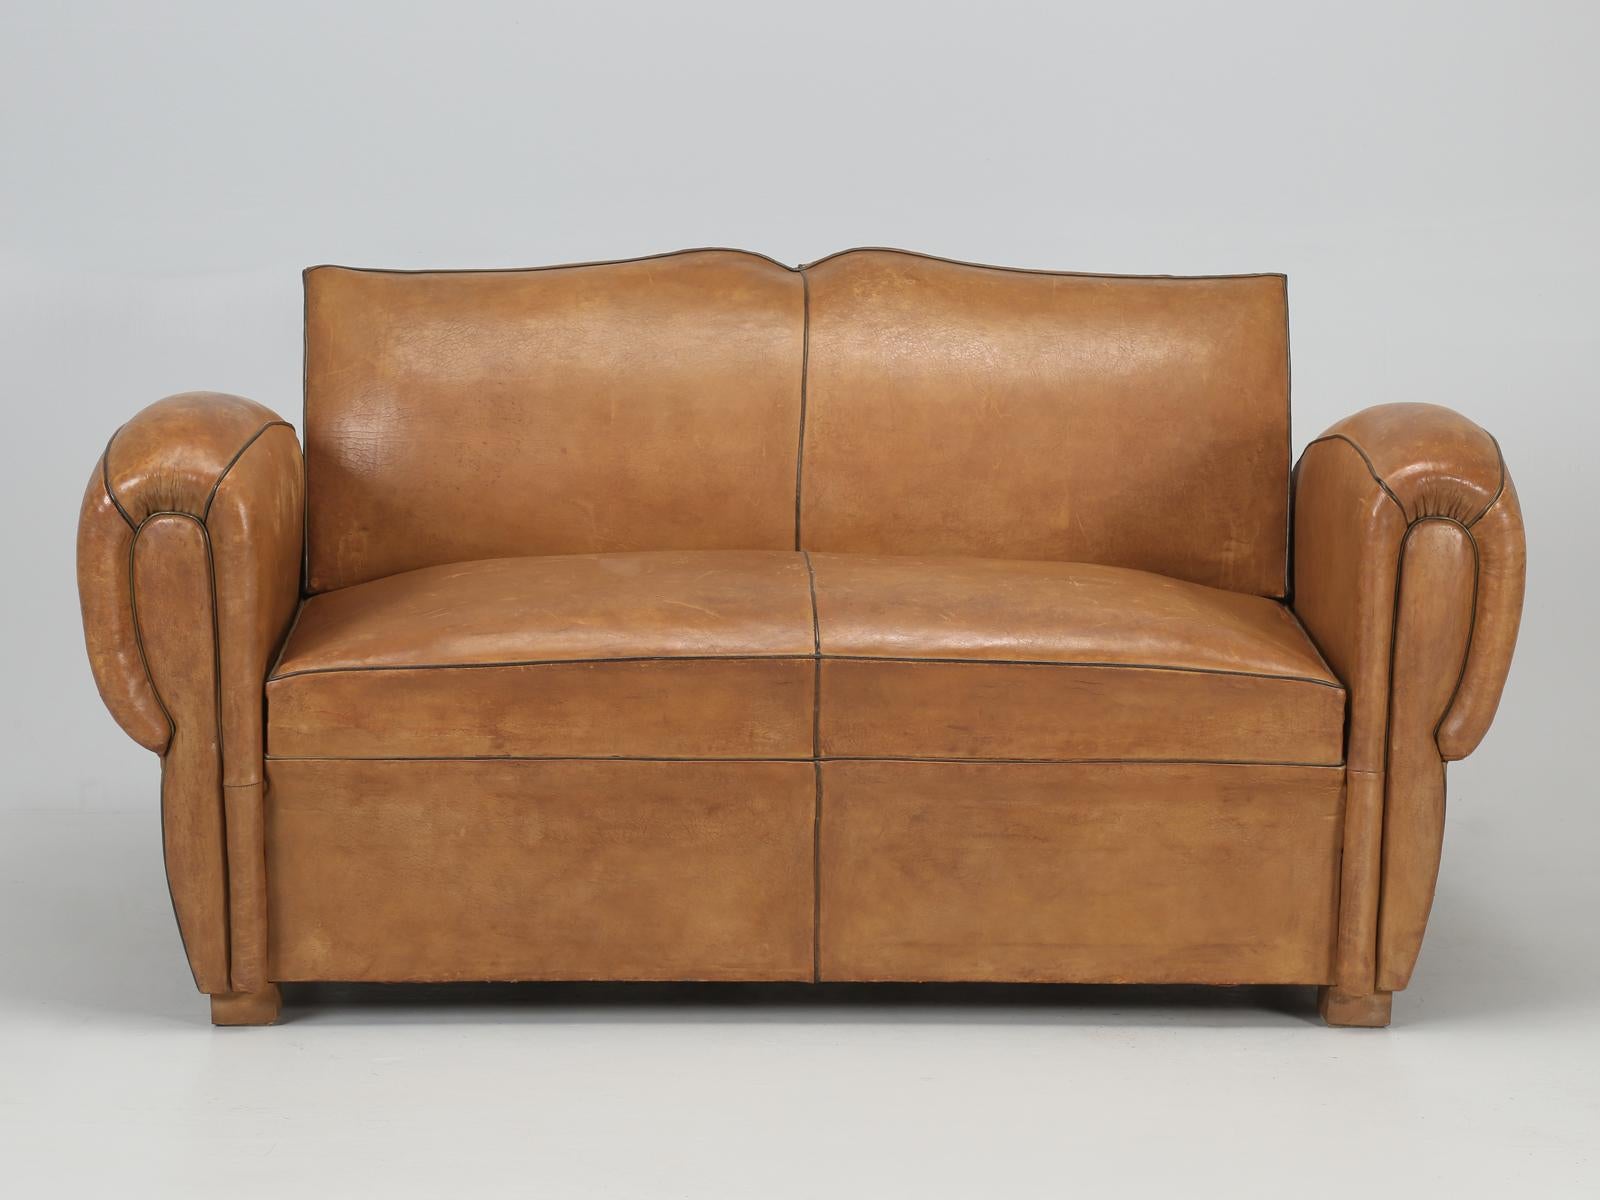 Hand-Crafted French Art Deco Settee That Opens into a Bed in Original Leather, New Mattress